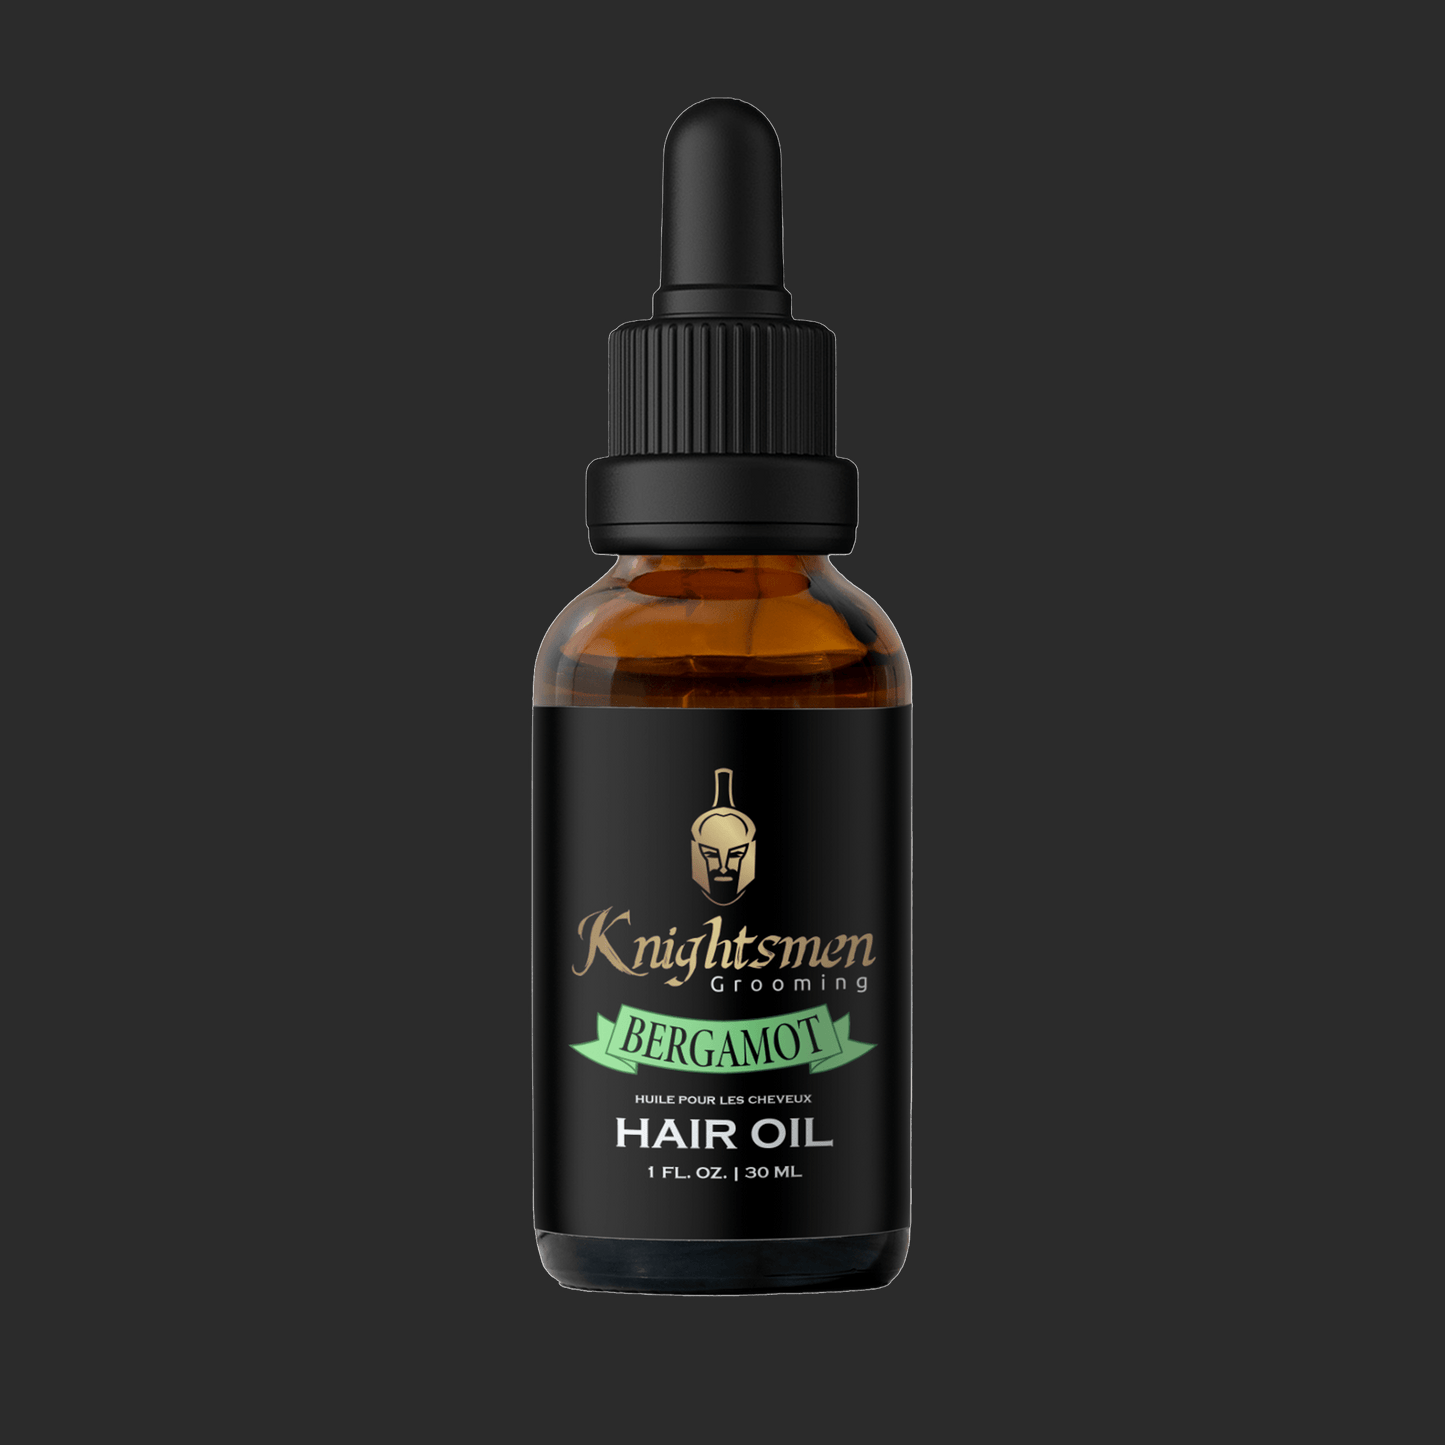 Bergamot Hair Oil and Hair Oil Kit for Hair Growth and Hair Conditioning by Knightsmen Grooming for all hair growth, hair care, hair conditioning, hair softener, hair serum, hair growth formula, hair oil recipe, hair oil, organic hair oil, scented hair oil, best hair oil, hair oil canada, hair oil toronto, hair oil for men